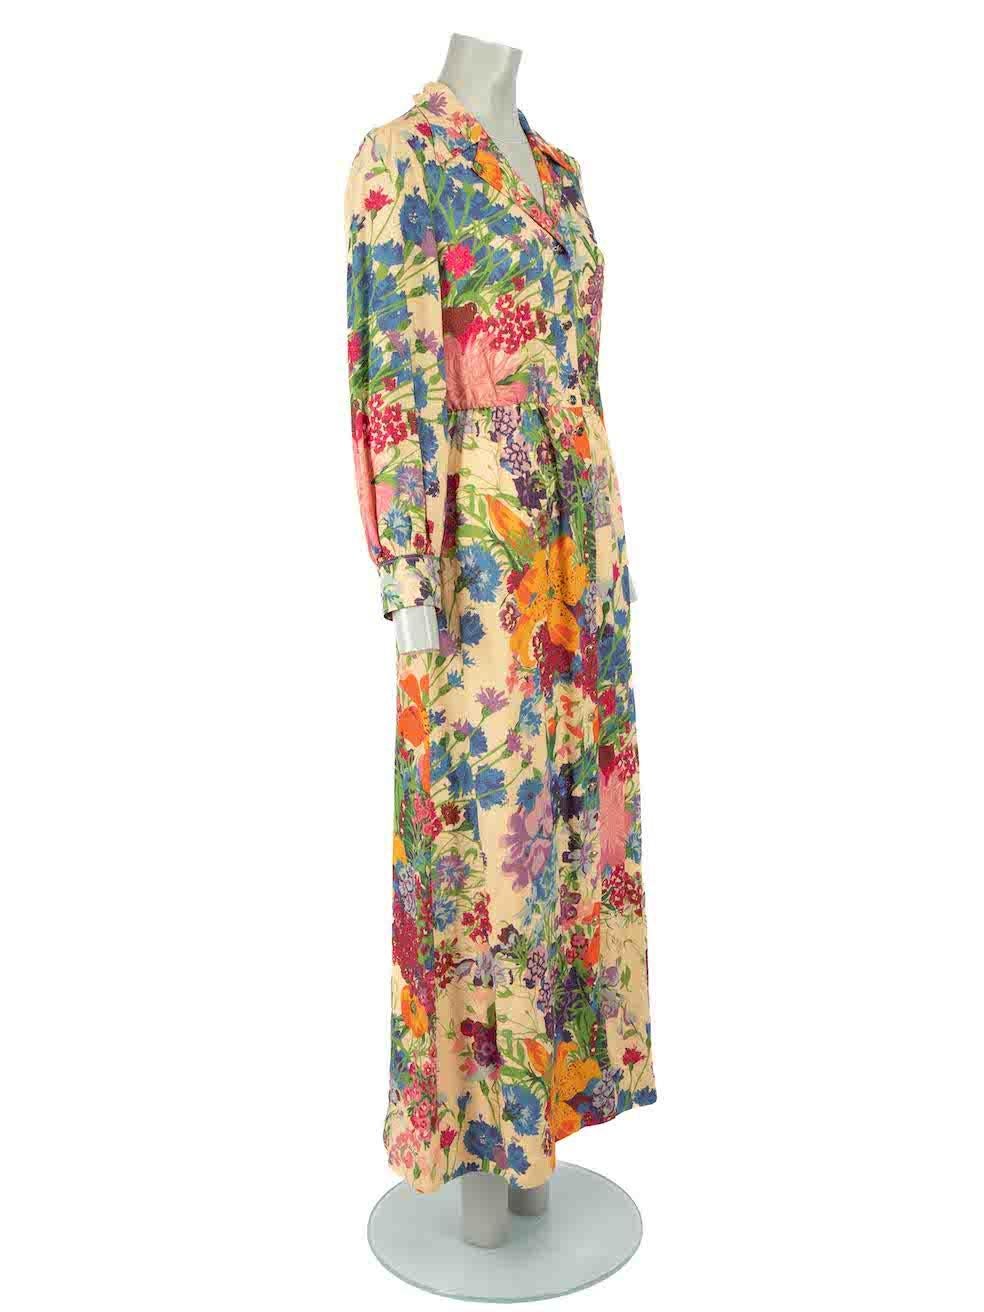 CONDITION is Never worn, with tags. No visible wear to dress is evident on this new Gucci designer resale item.
 
 Details
 2021
 Multicolour
 Viscose
 Shirt dress
 Floral pattern
 Metallic thread
 Maxi
 Long sleeves
 V-neck
 Button up fastening
 2x